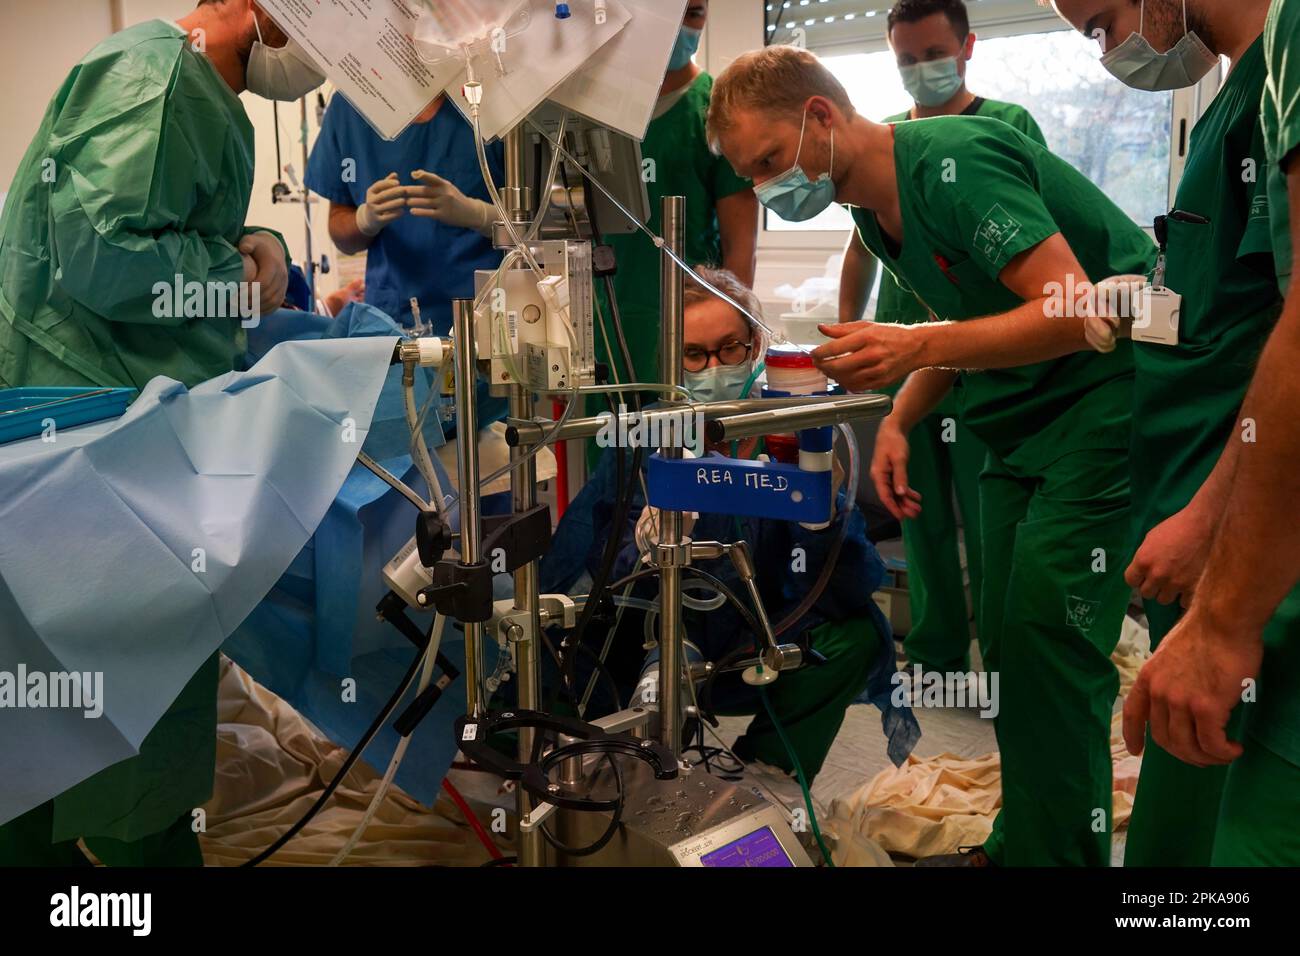 Training of medical interns in the ECMO technique, Extracorporeal Membrane Oxygenation. Stock Photo